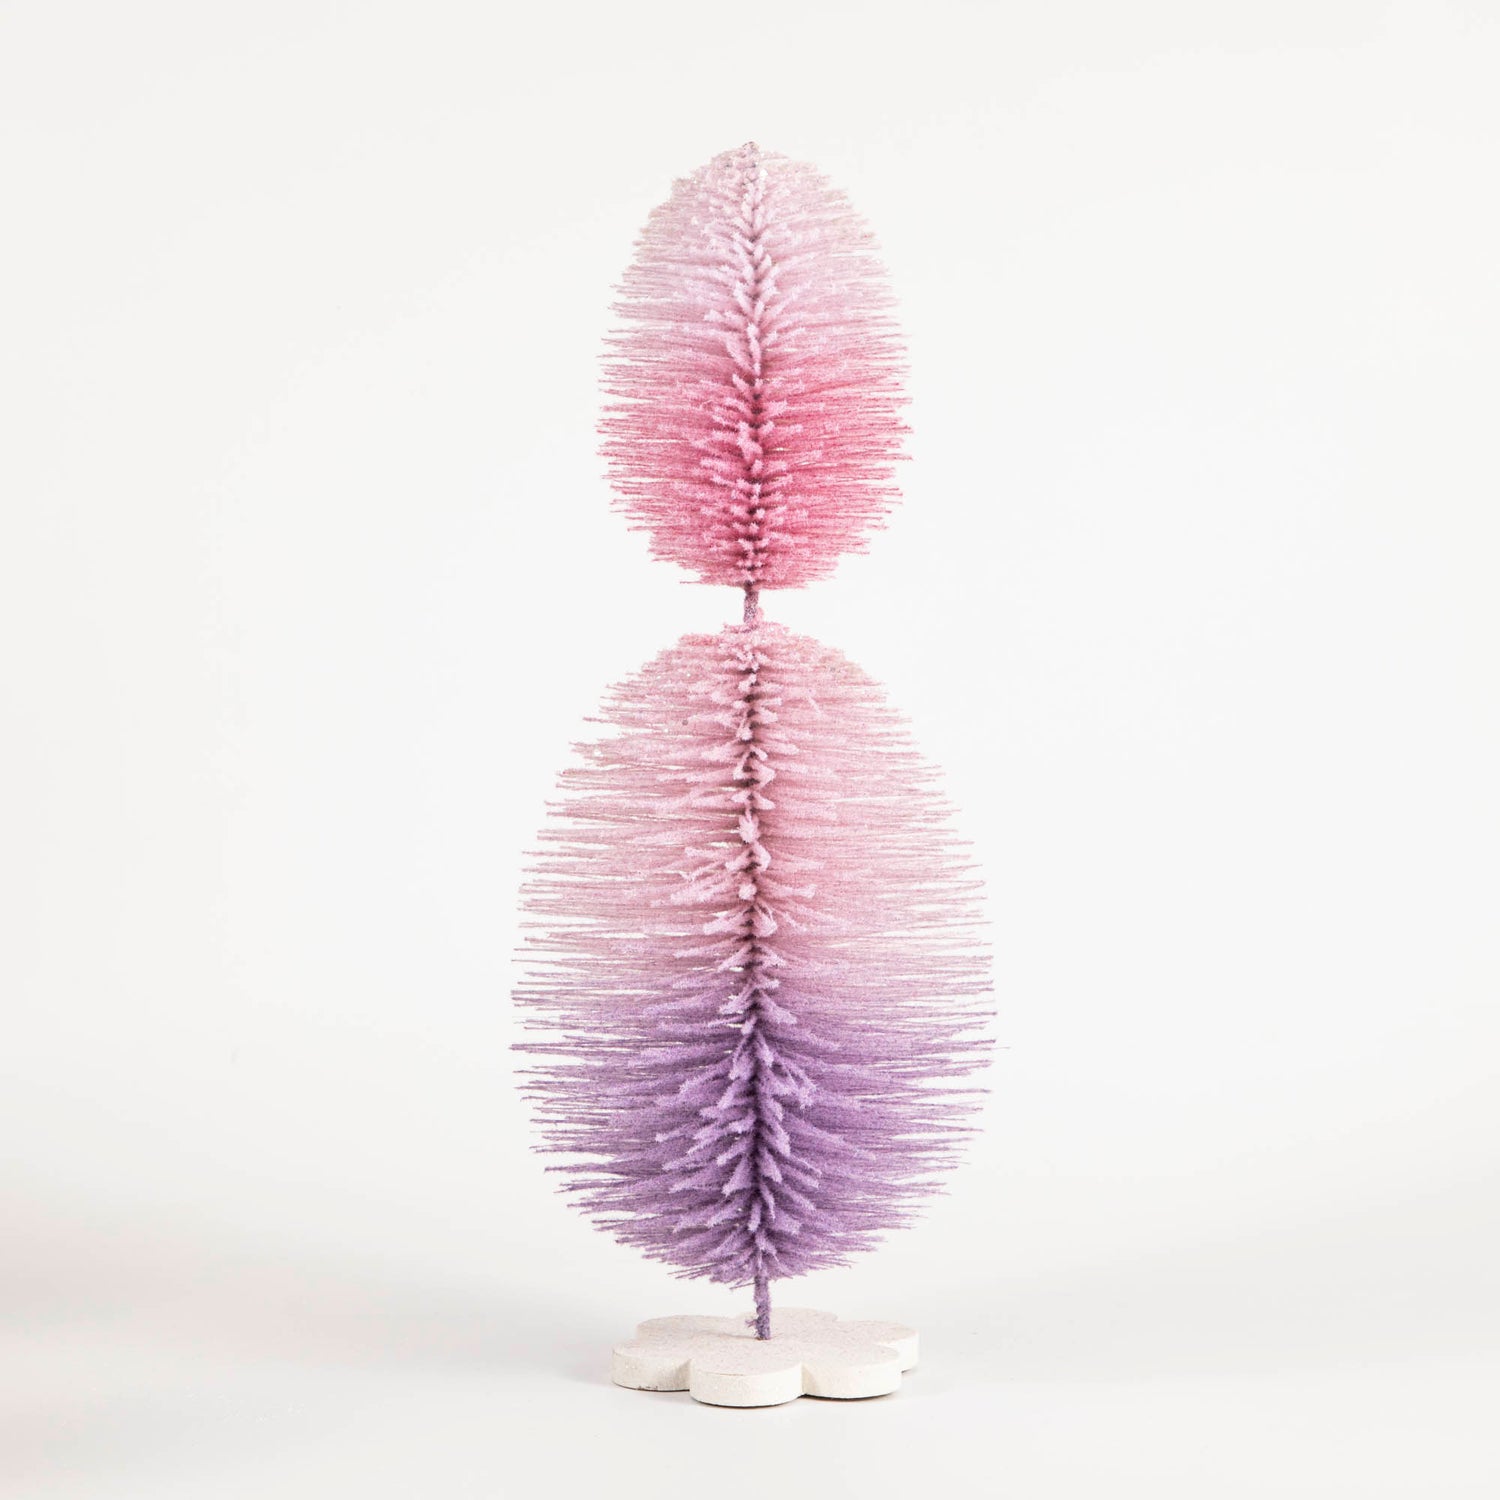 An exquisite Glitterville Sisal Topiary Tree, adorned in vibrant pink and purple hues, gracefully stands against a pristine white background.